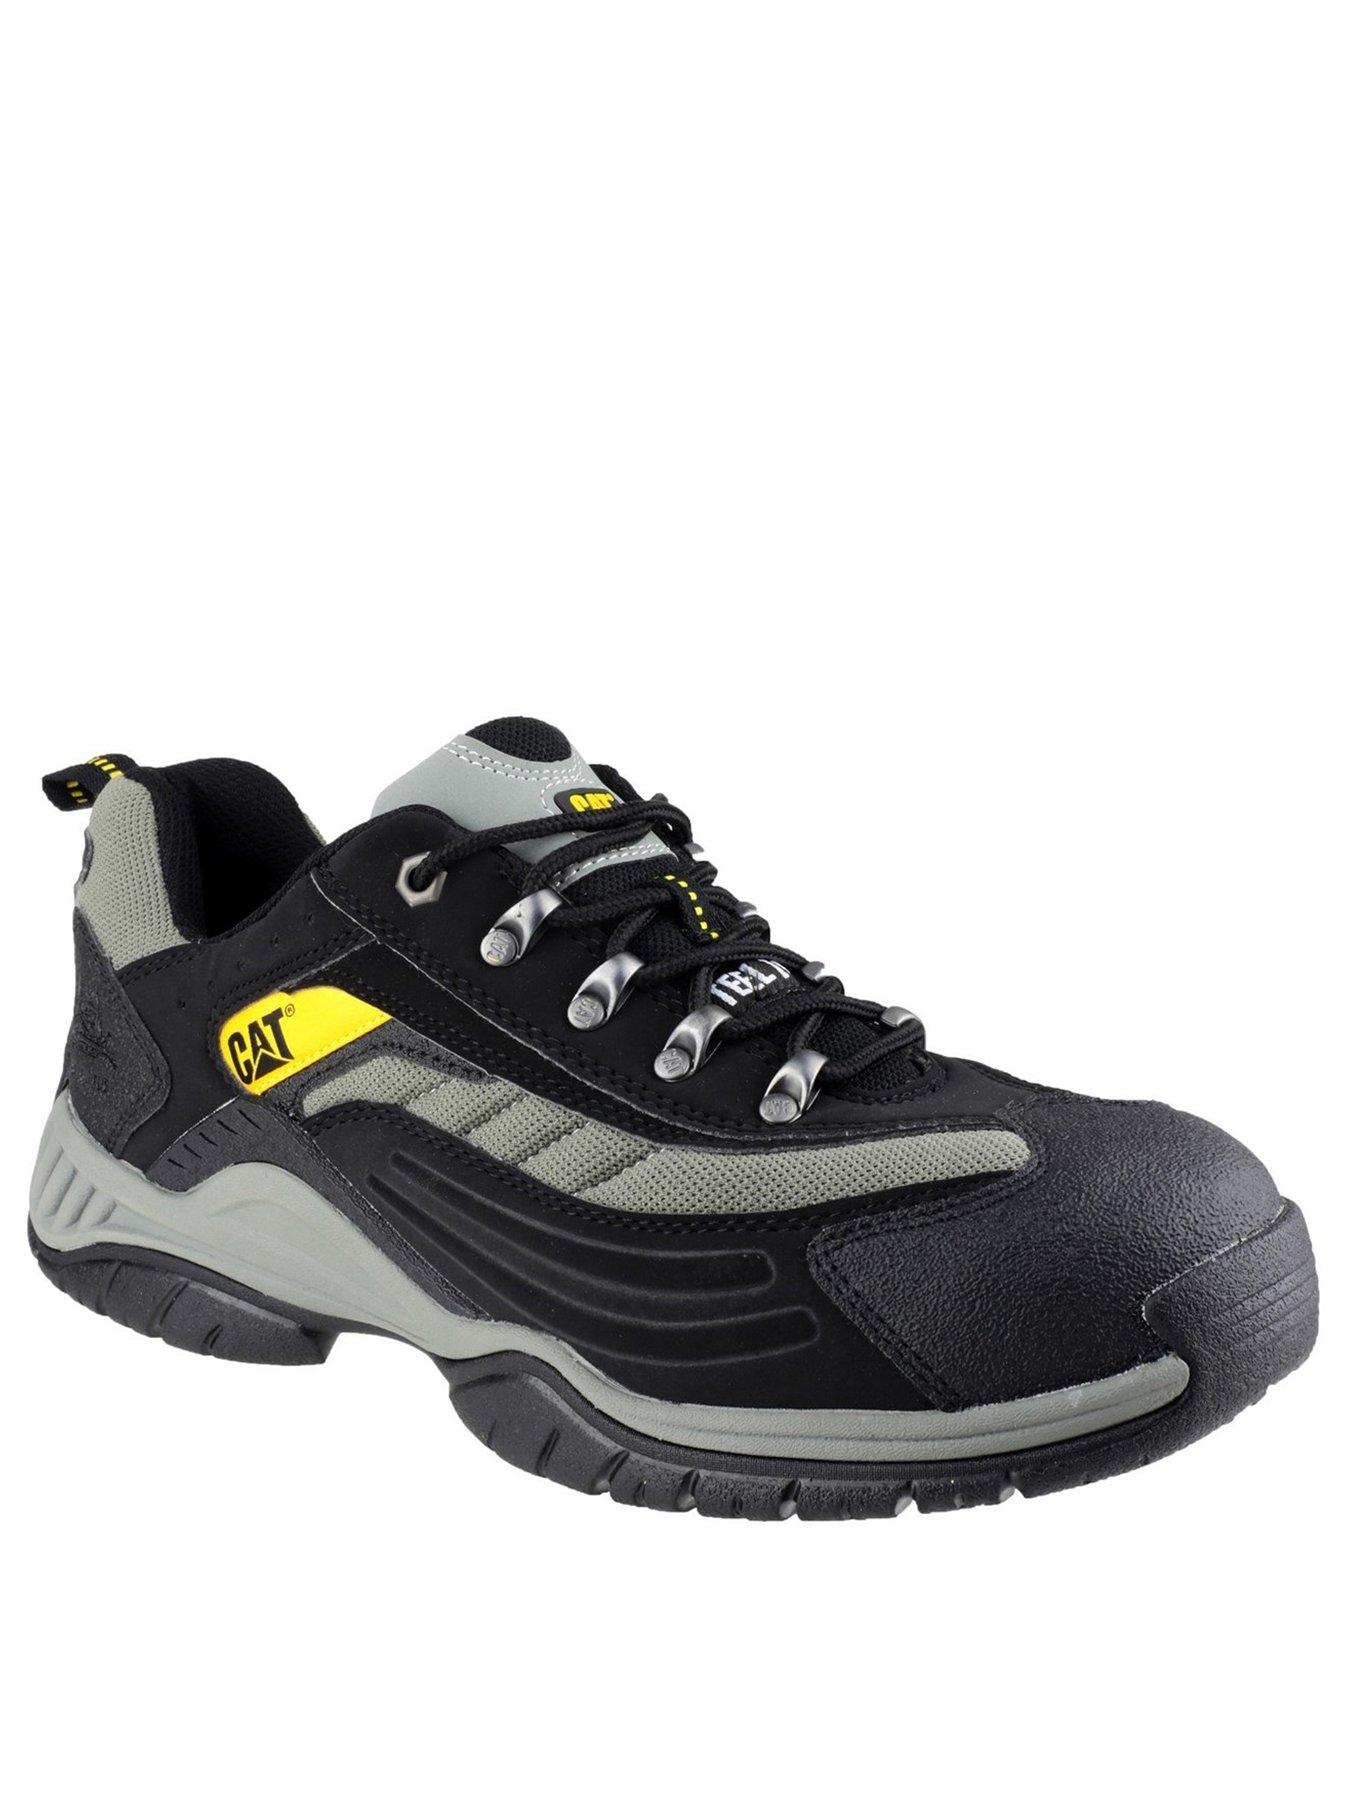 Shoes & boots Cat Moor Safety Trainers - Black